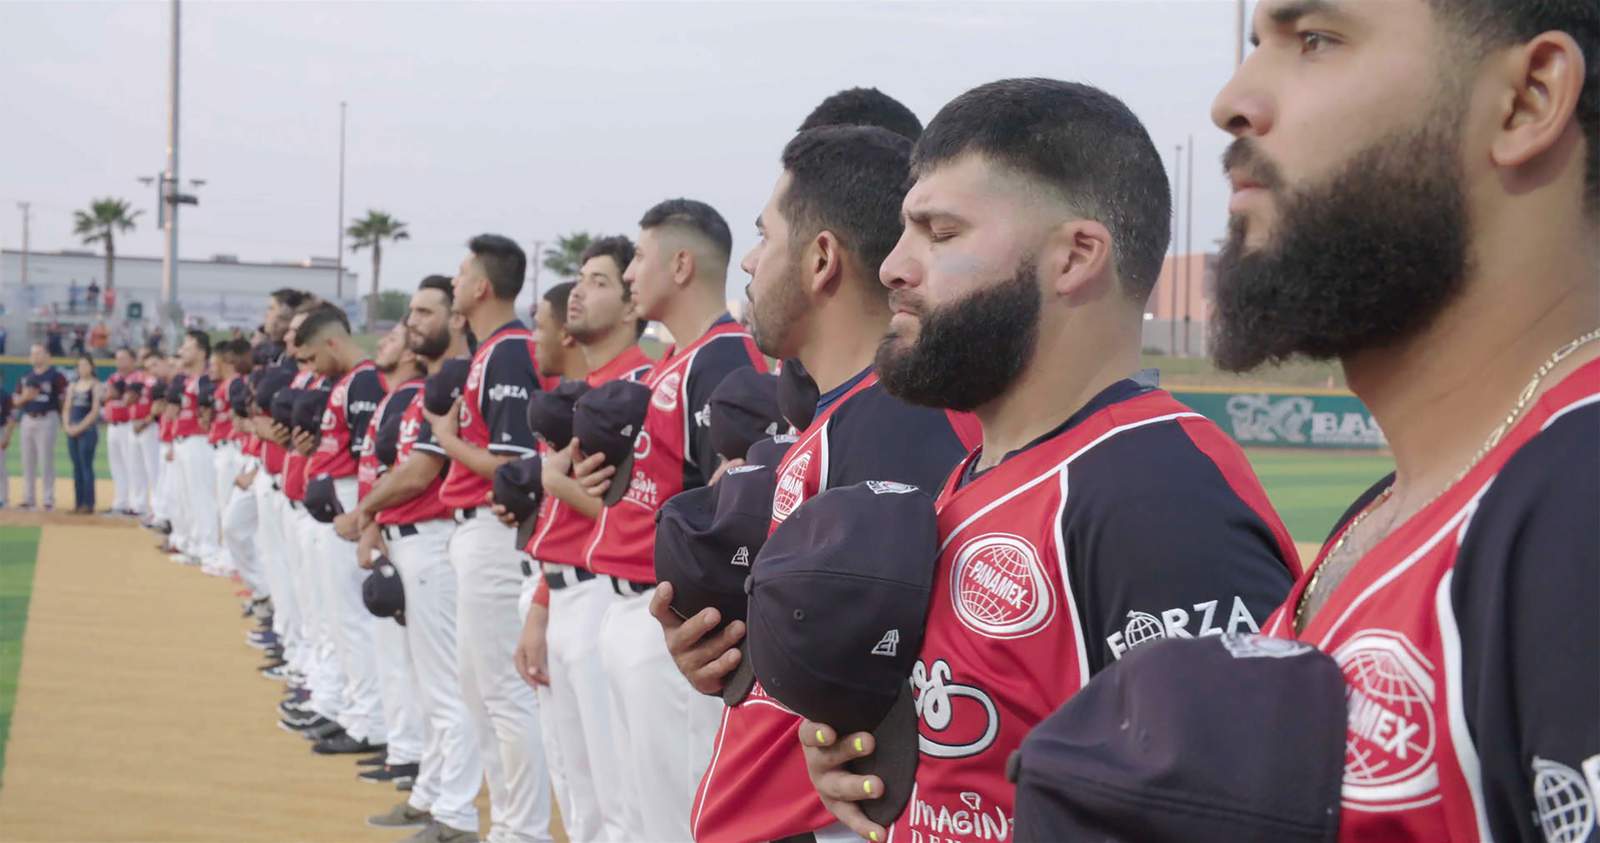 'Bad Hombres' film uses baseball to show the game of borders